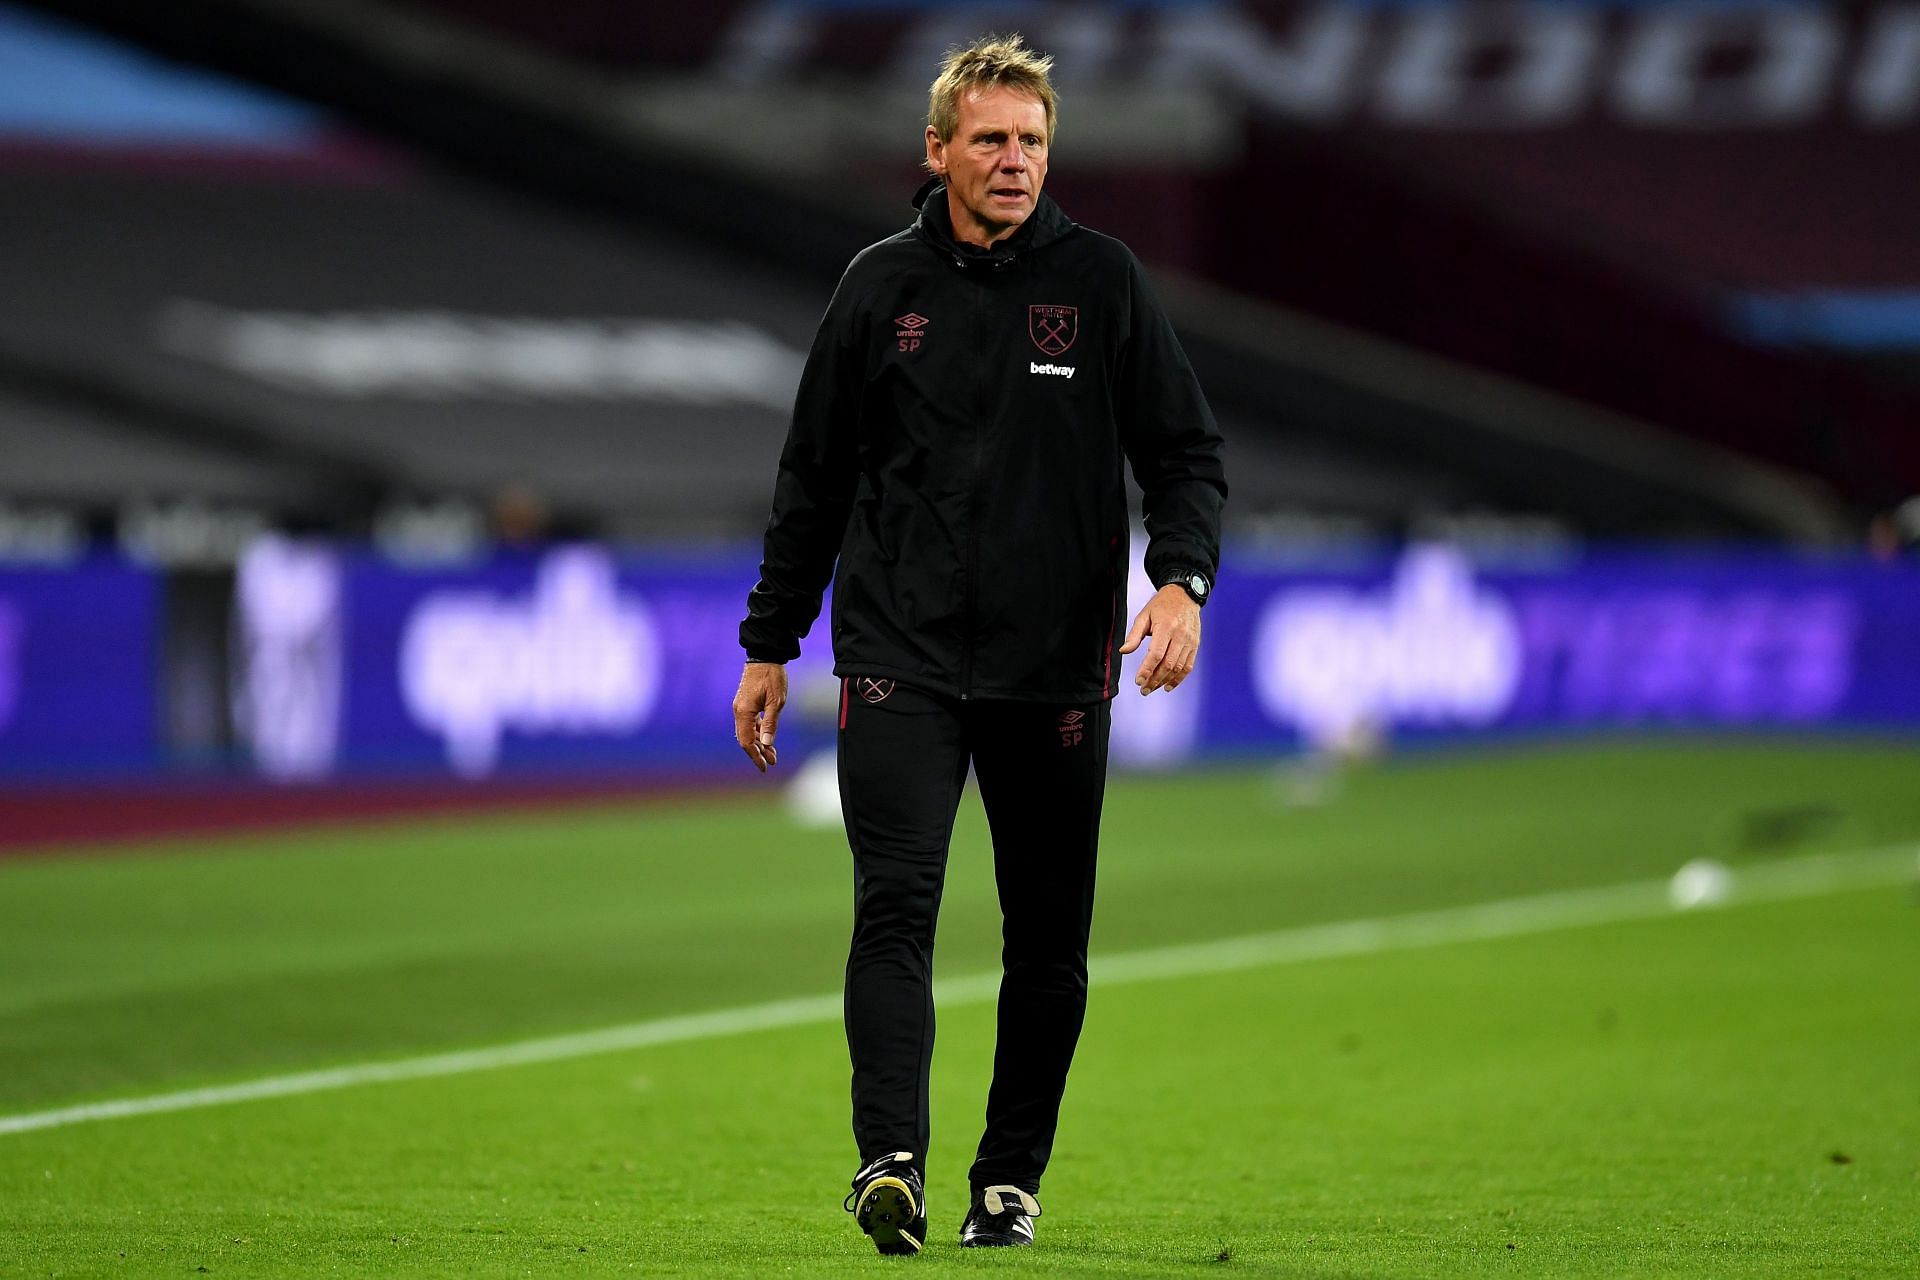 Former football player, Stuart Pearce, first team coach of West Ham United looks on during the warm up prior to the Premier League match between West Ham United and Wolverhampton Wanderers at London Stadium on September 27, 2020 in London, England.